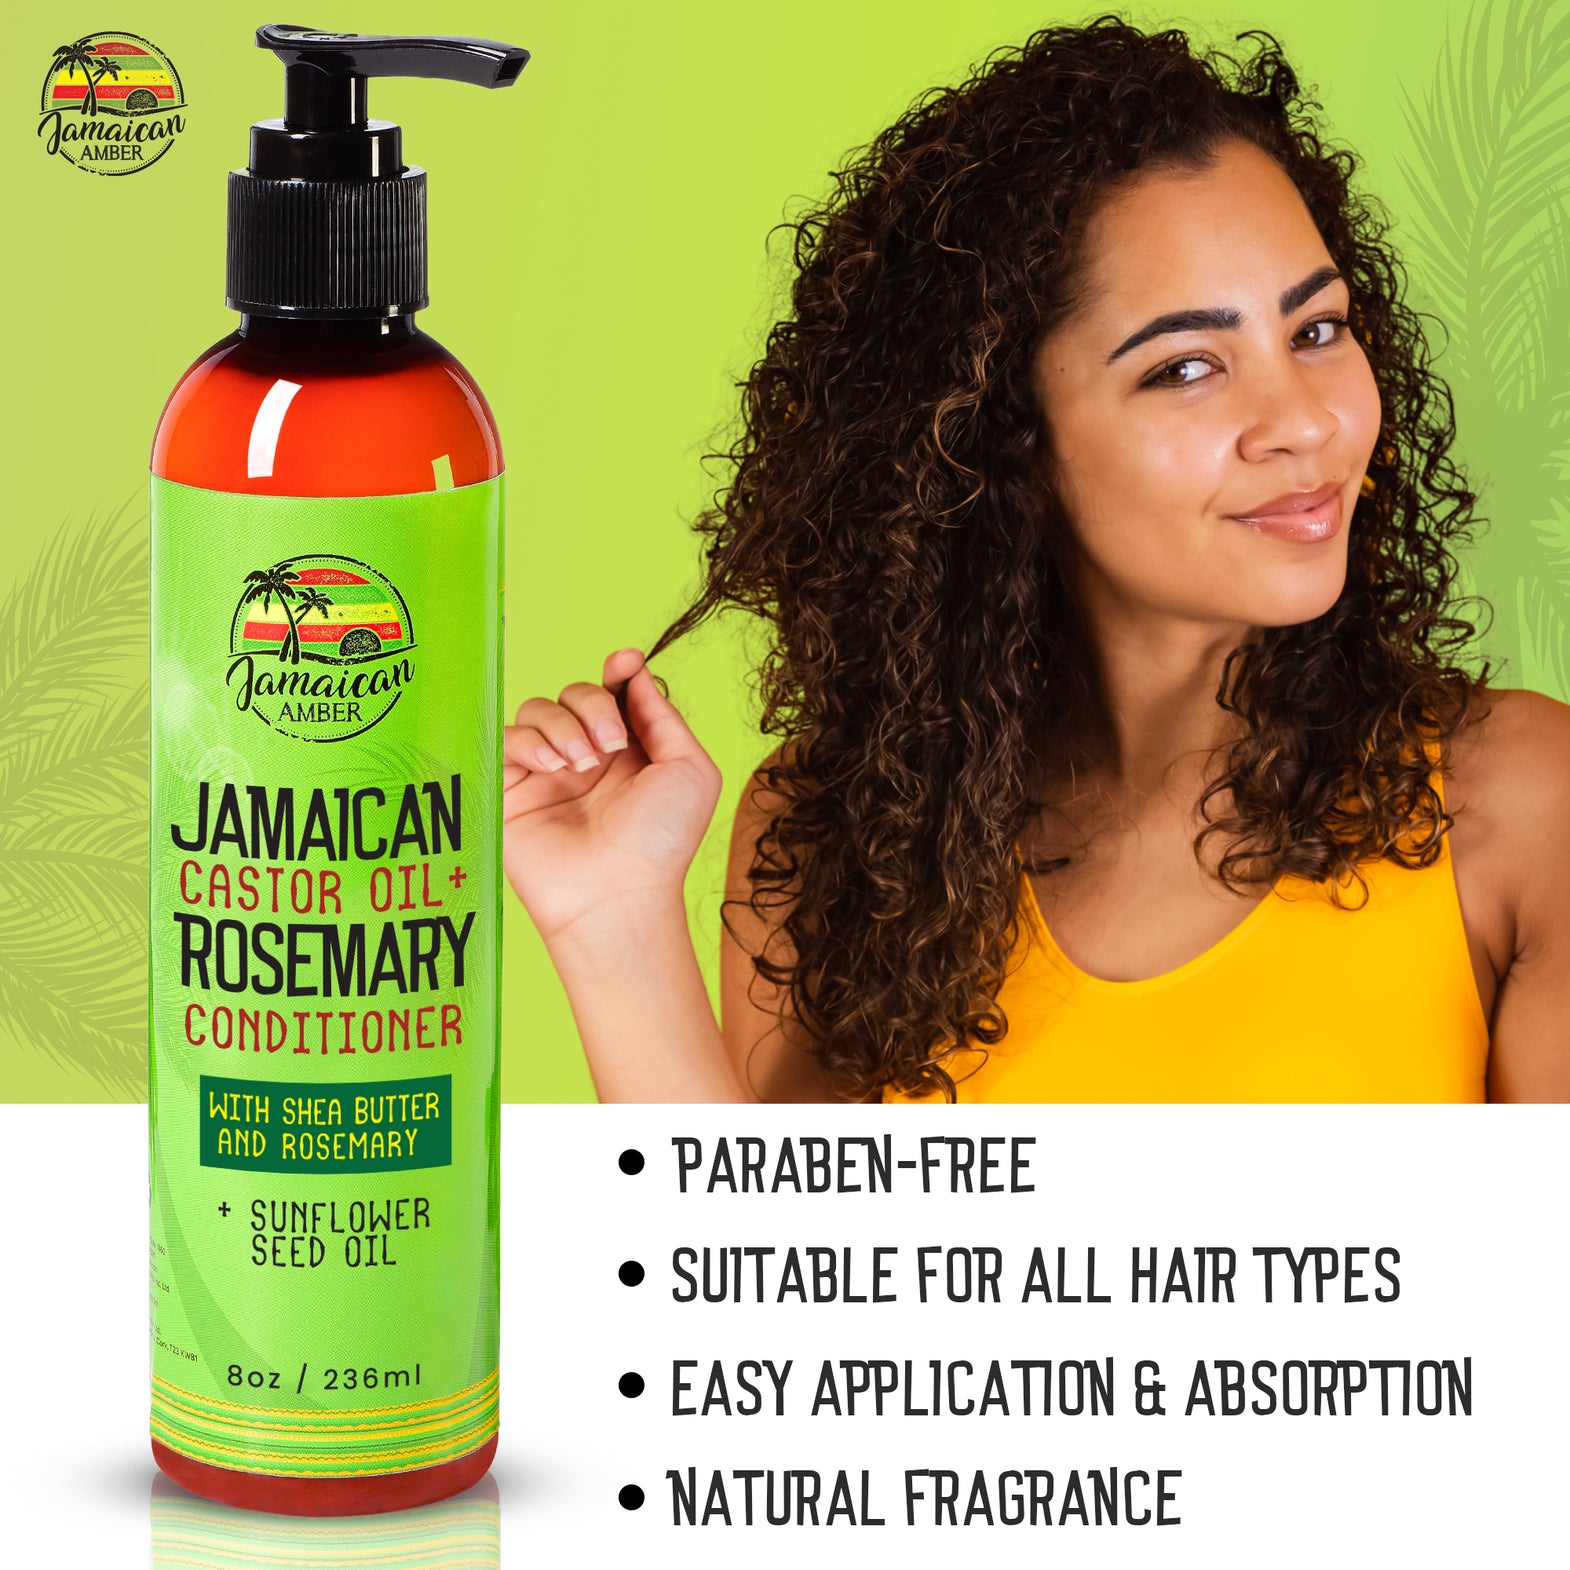 Jamaican Amber Jamaican Castor Oil + Rosemary Hair Conditioner With Shea Butter 236ml